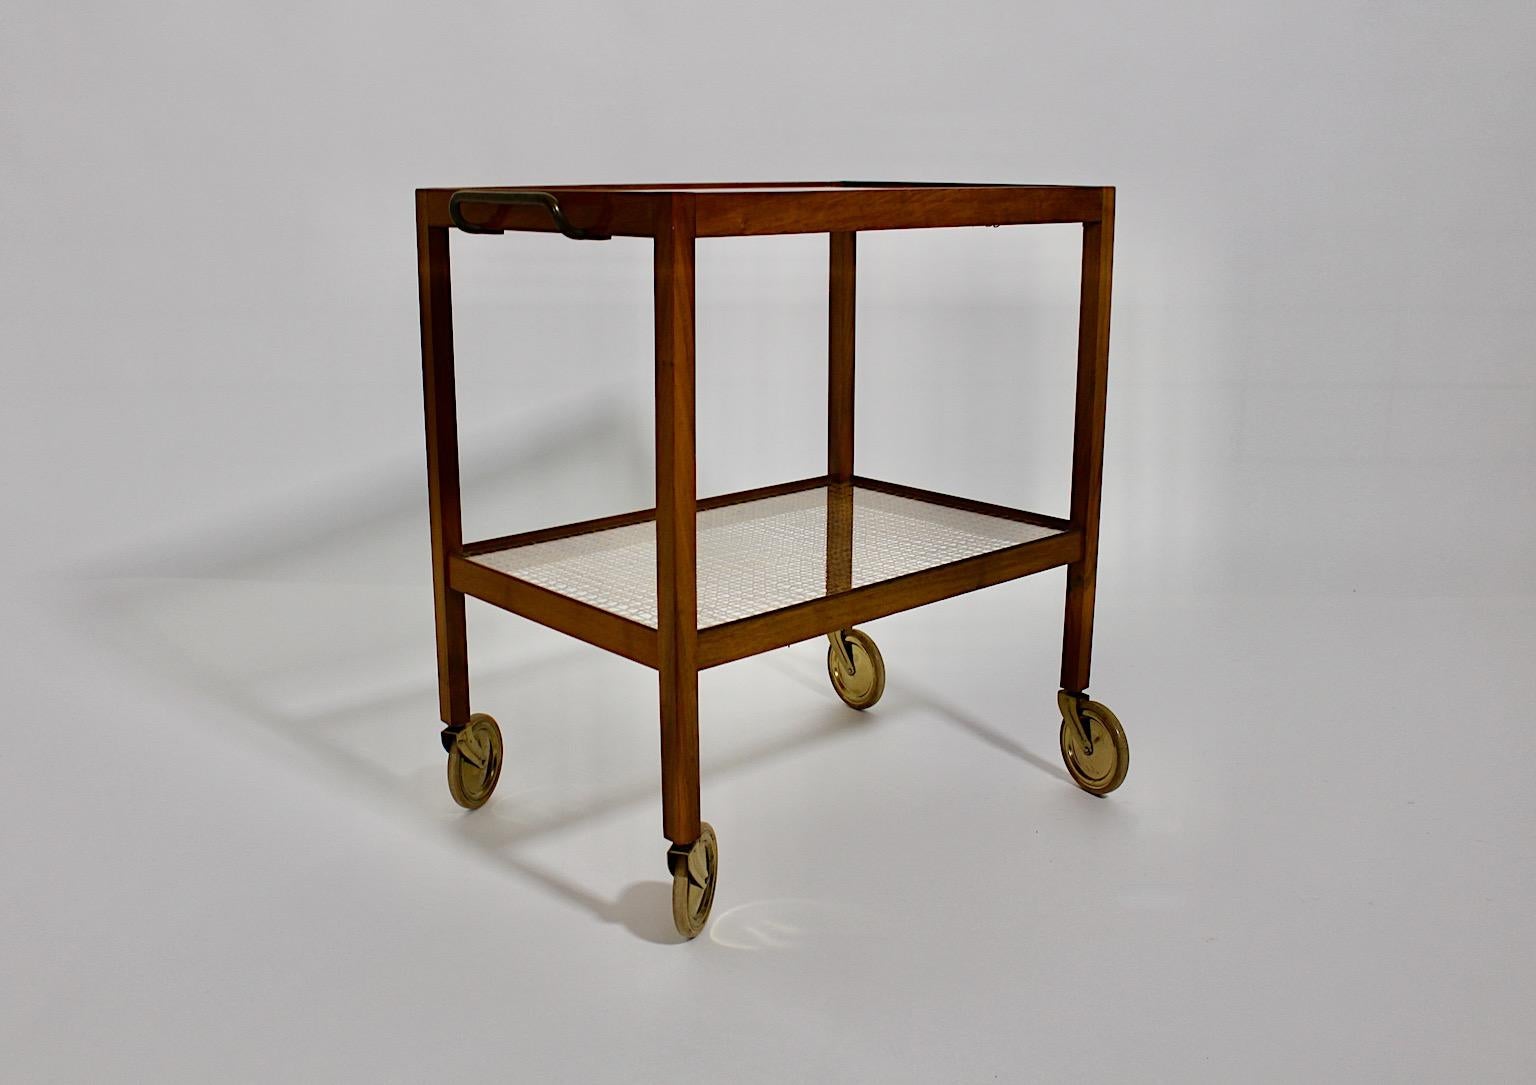 Art Deco Vintage Walnut Brass Bar Cart or Serving Table circa 1935 Austria In Good Condition For Sale In Vienna, AT